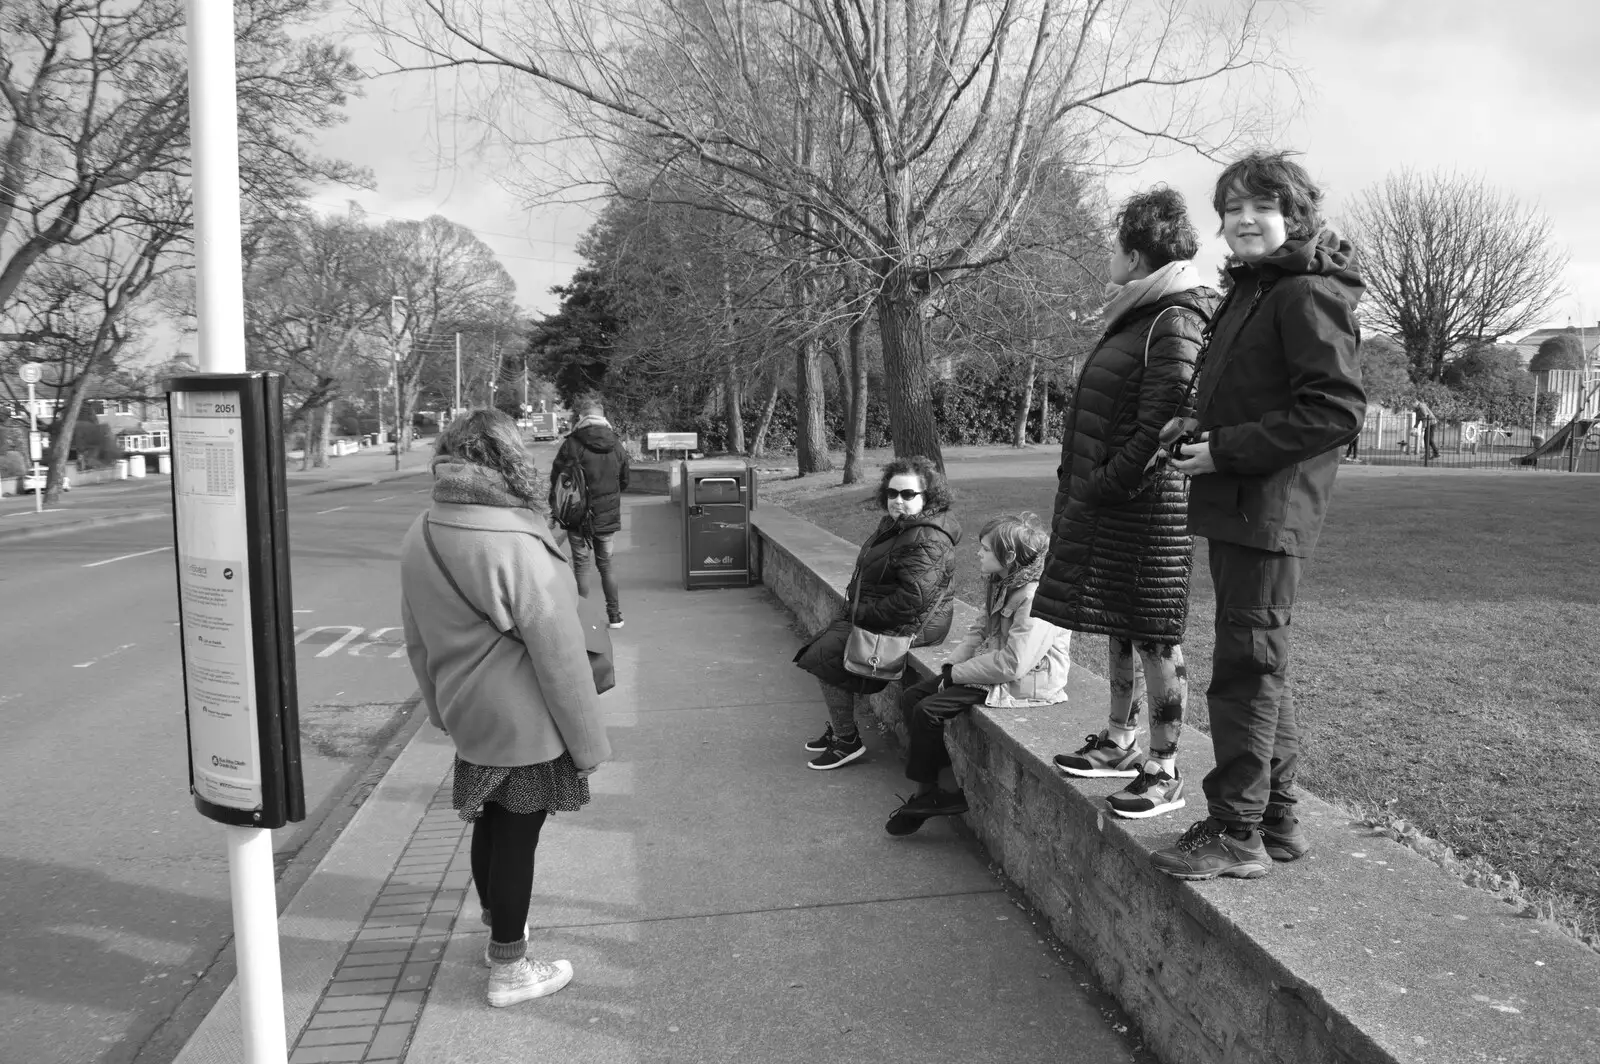 We hang around waiting for the bus, from The Dead Zoo, Dublin, Ireland - 17th February 2023